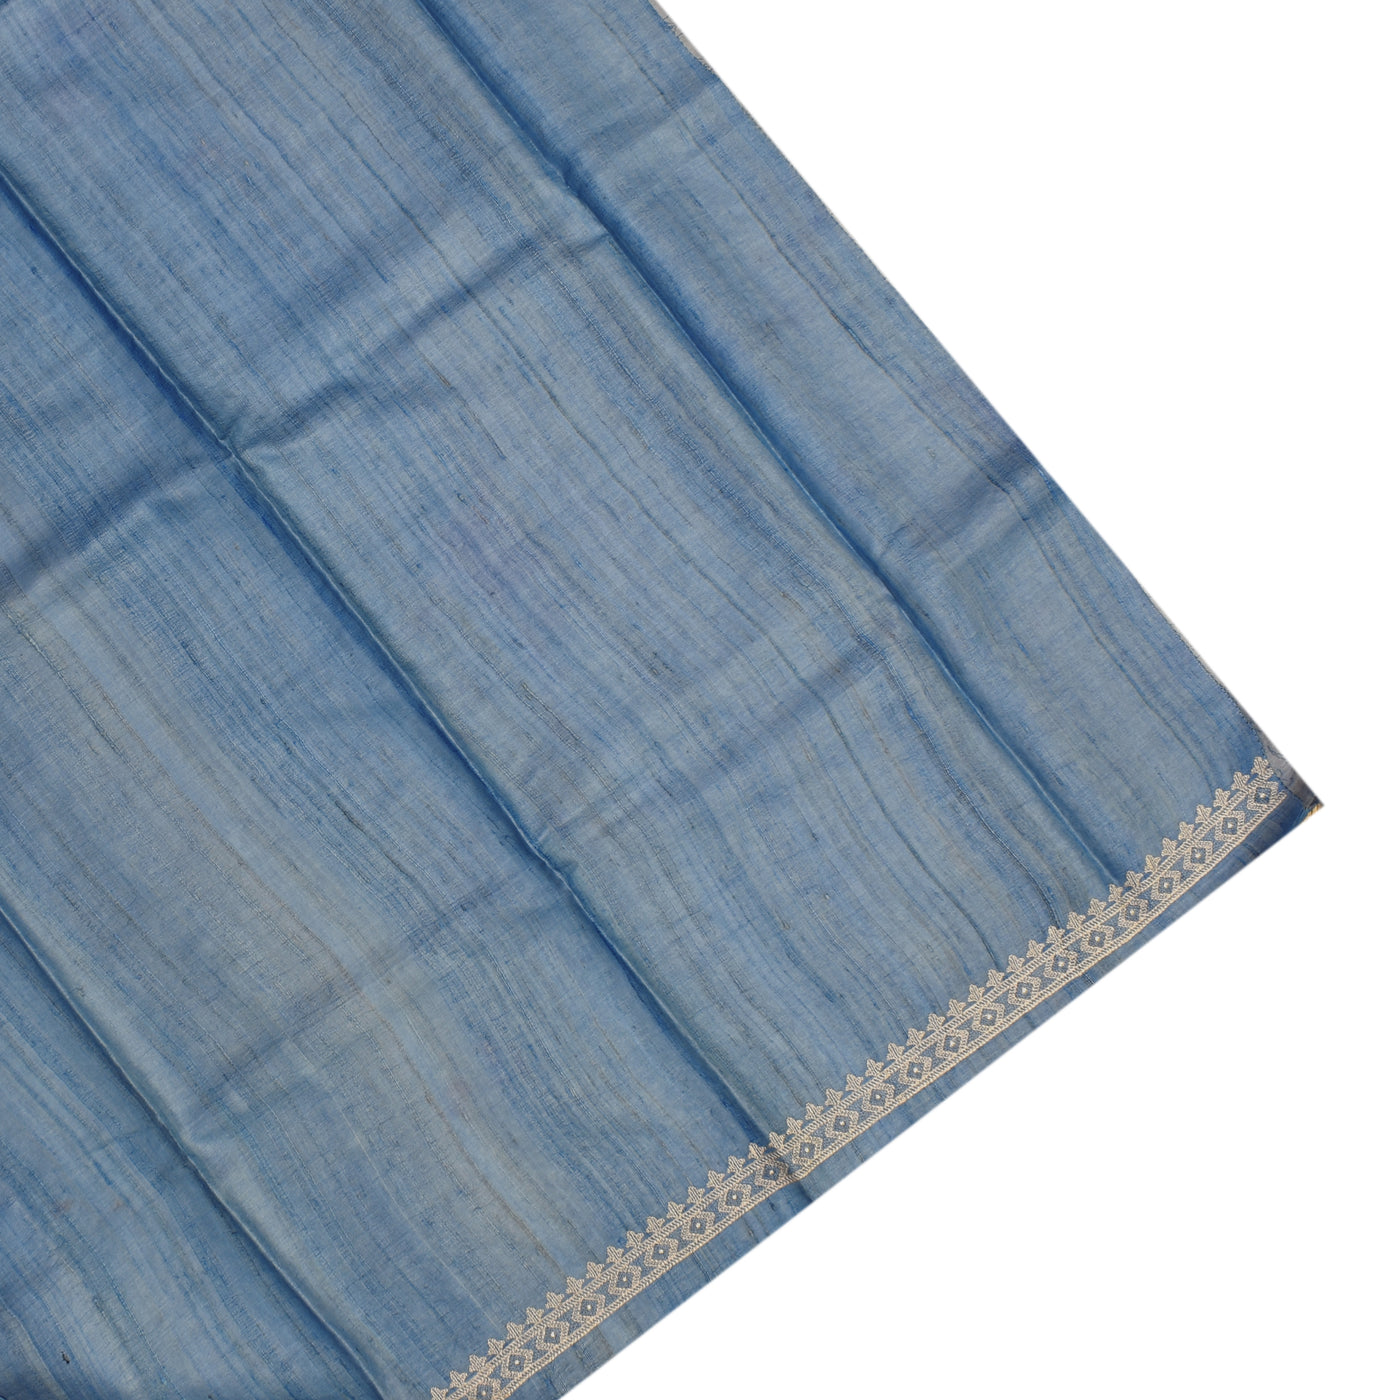 Baby Blue Tussar Silk Saree with Floral Embroidery Design